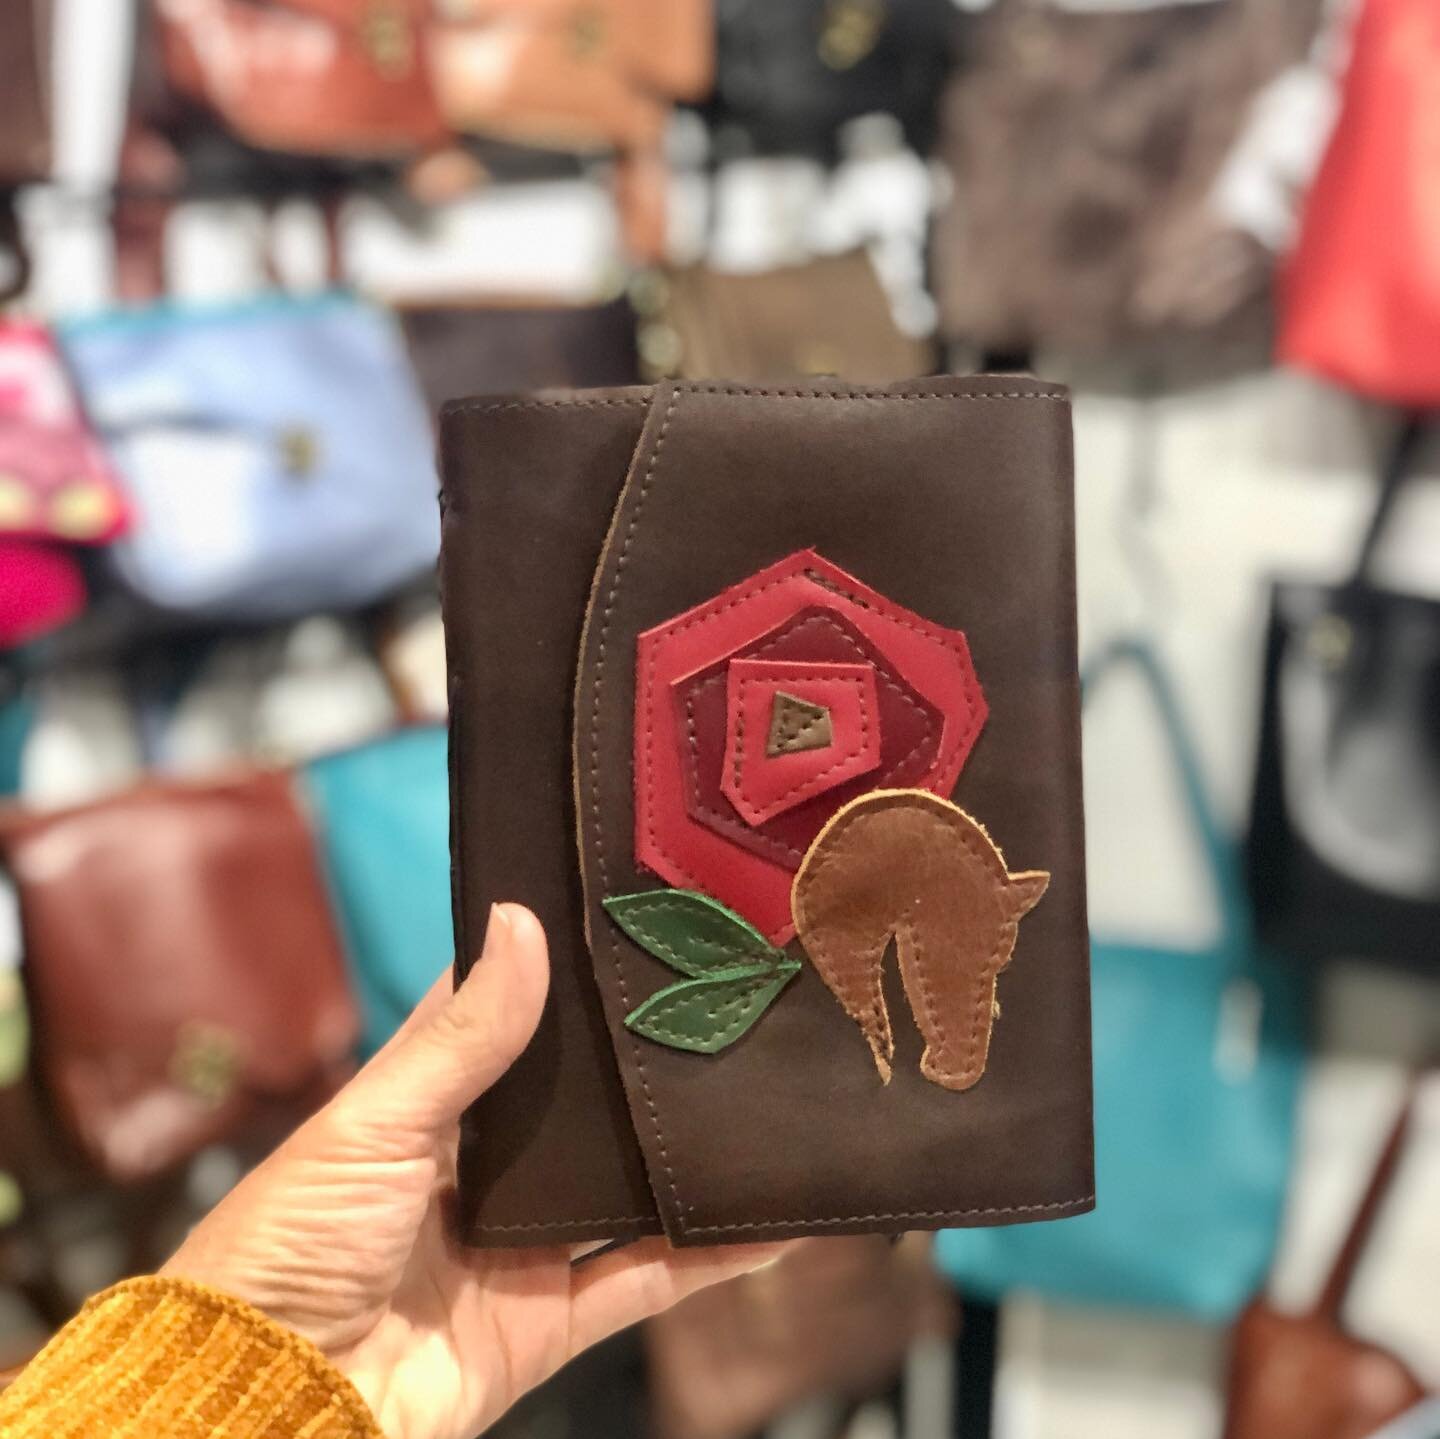 I&rsquo;m at the Horse Park this weekend for the Ky Crafted Market with the @kyartscouncil . Here are a couple sneak peeks for the weekend of some of my new items. The horse and rose were inspired by it being the Kentucky Derby&rsquo;s 150th year. I 